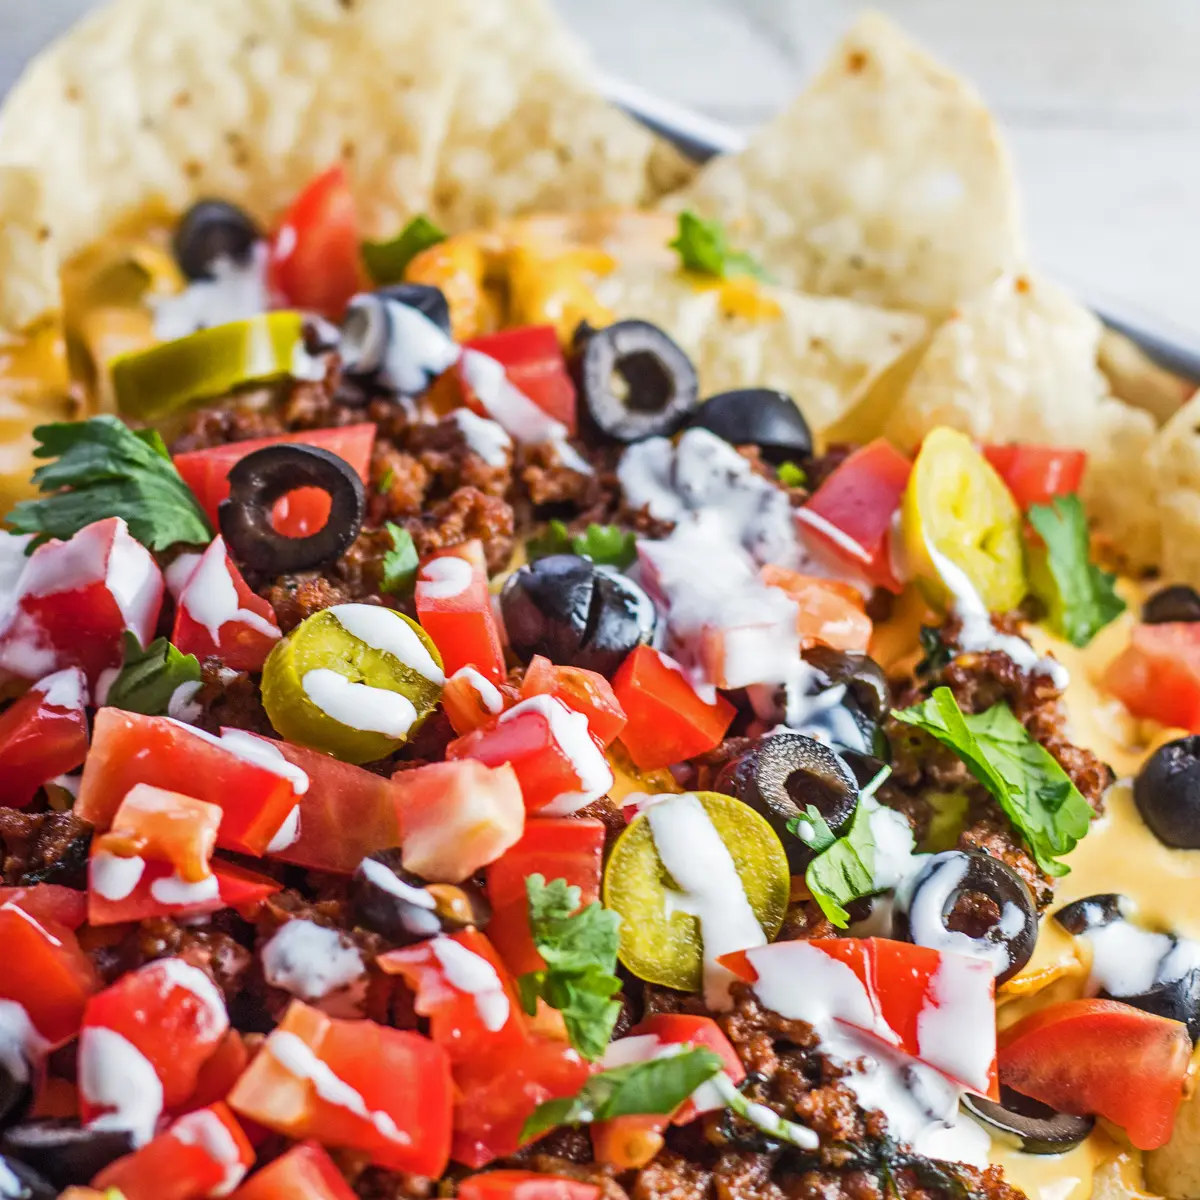 Loaded nachos supreme with nacho toppings.